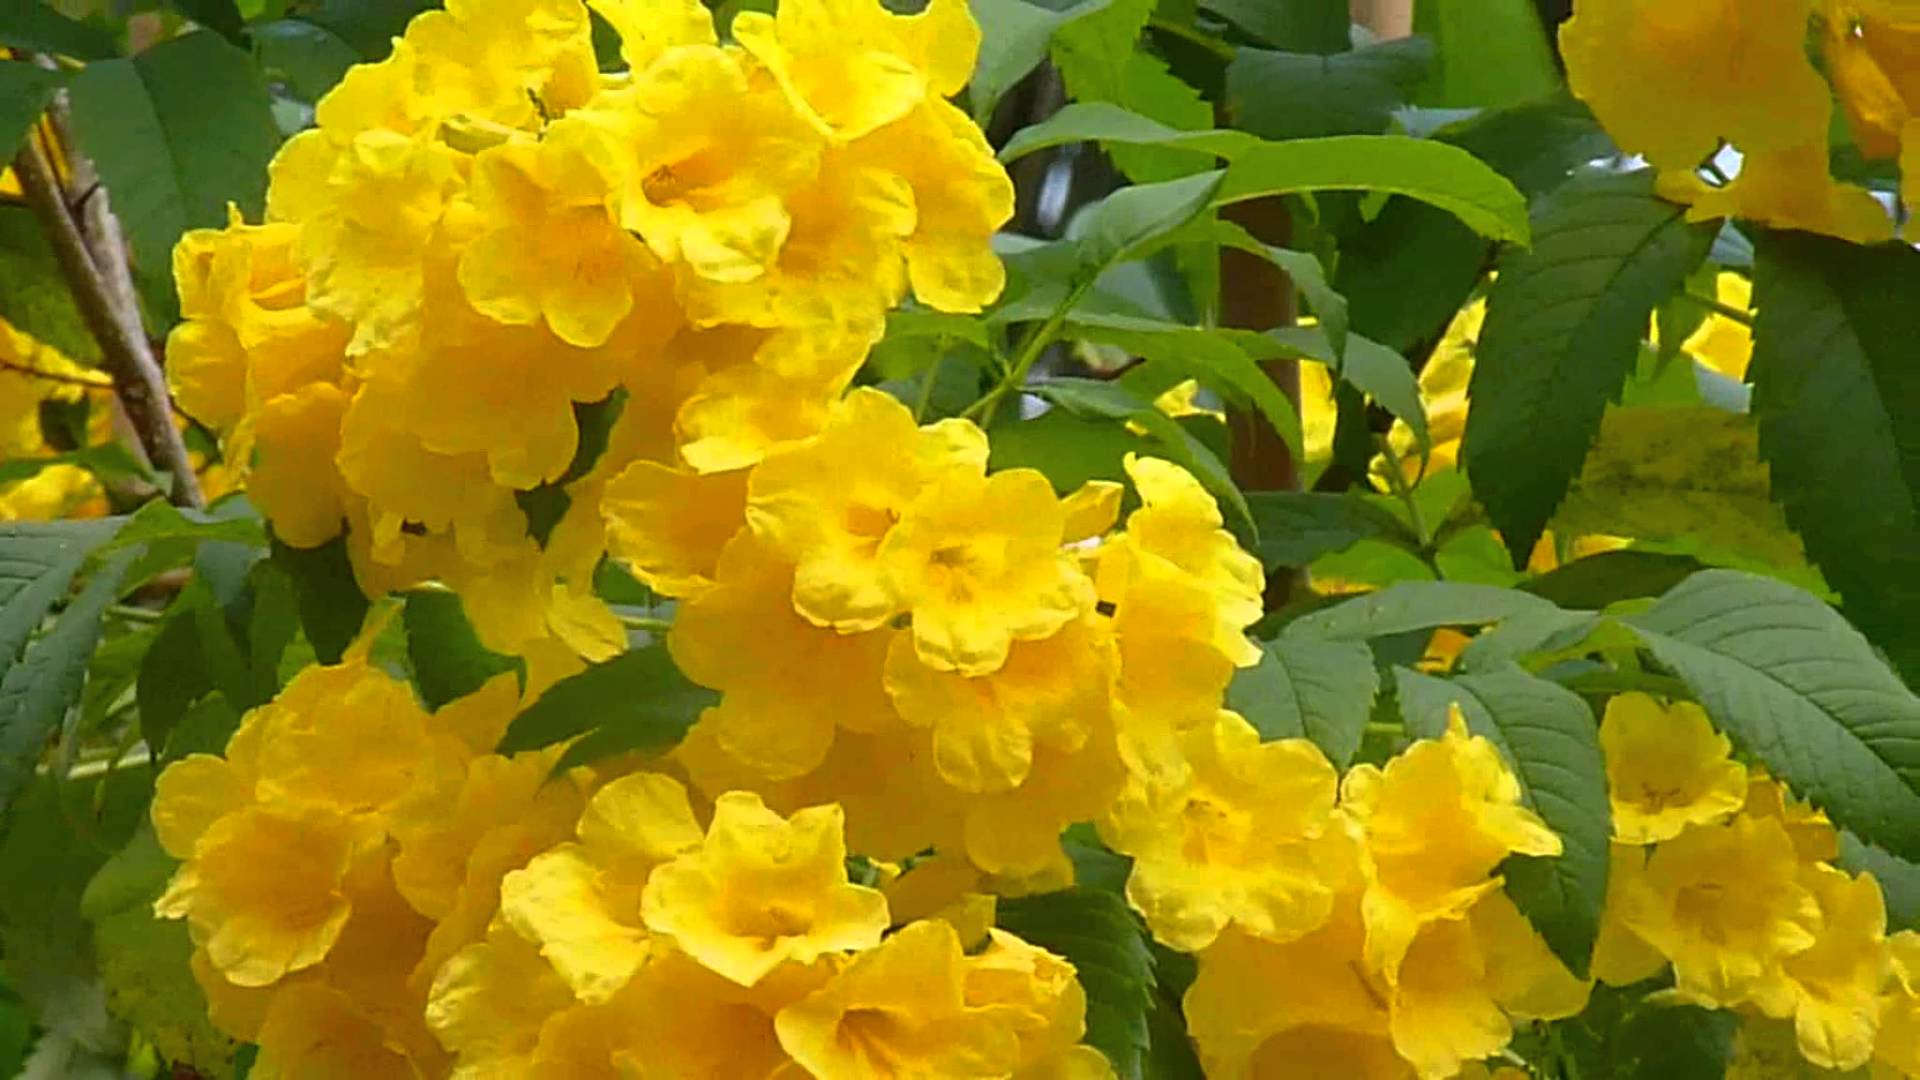 Singapore Plants -- YELLOW BELL, TRUMPET FLOWERS - YouTube